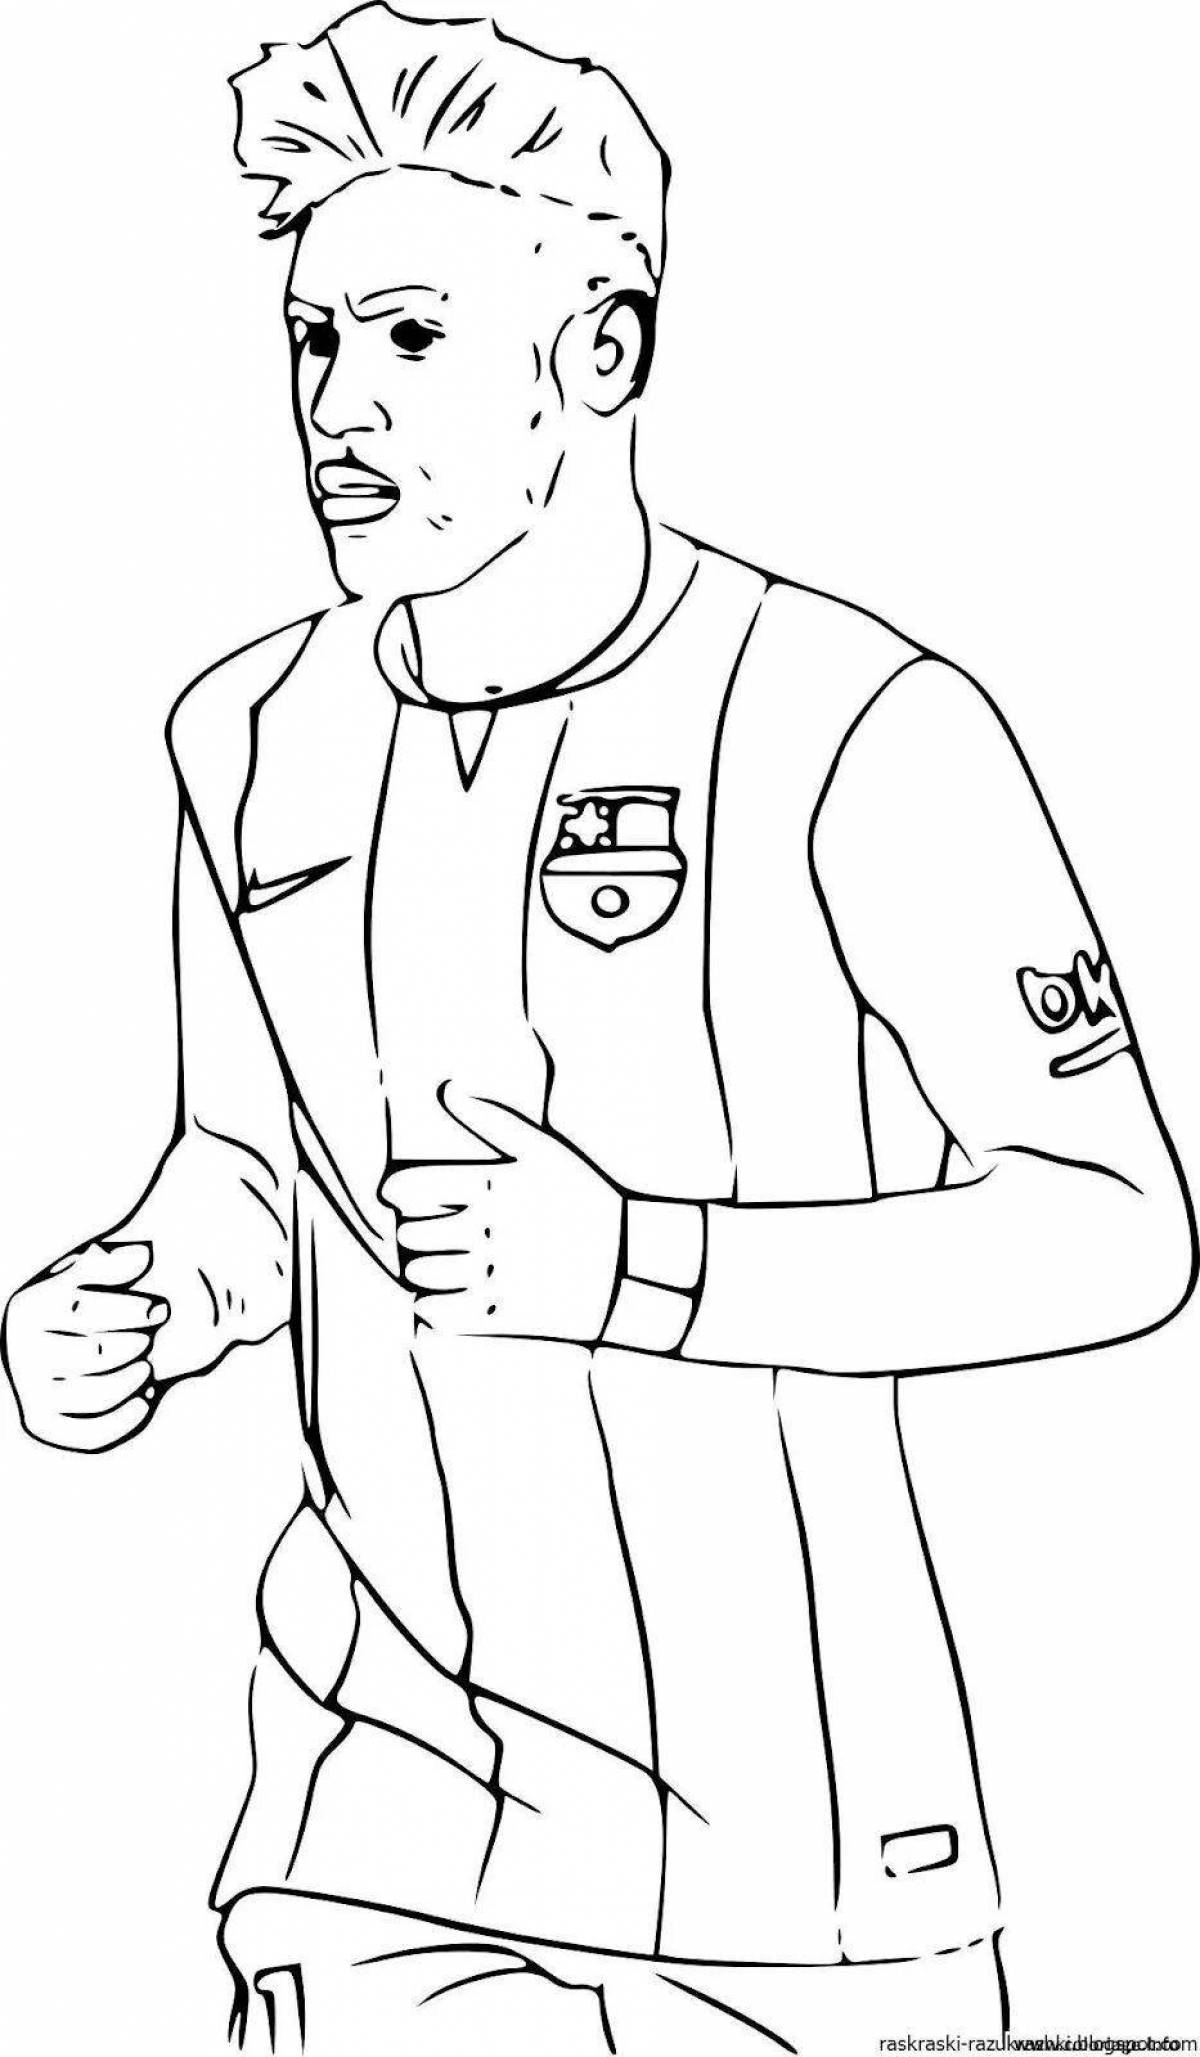 Psg team animated coloring page